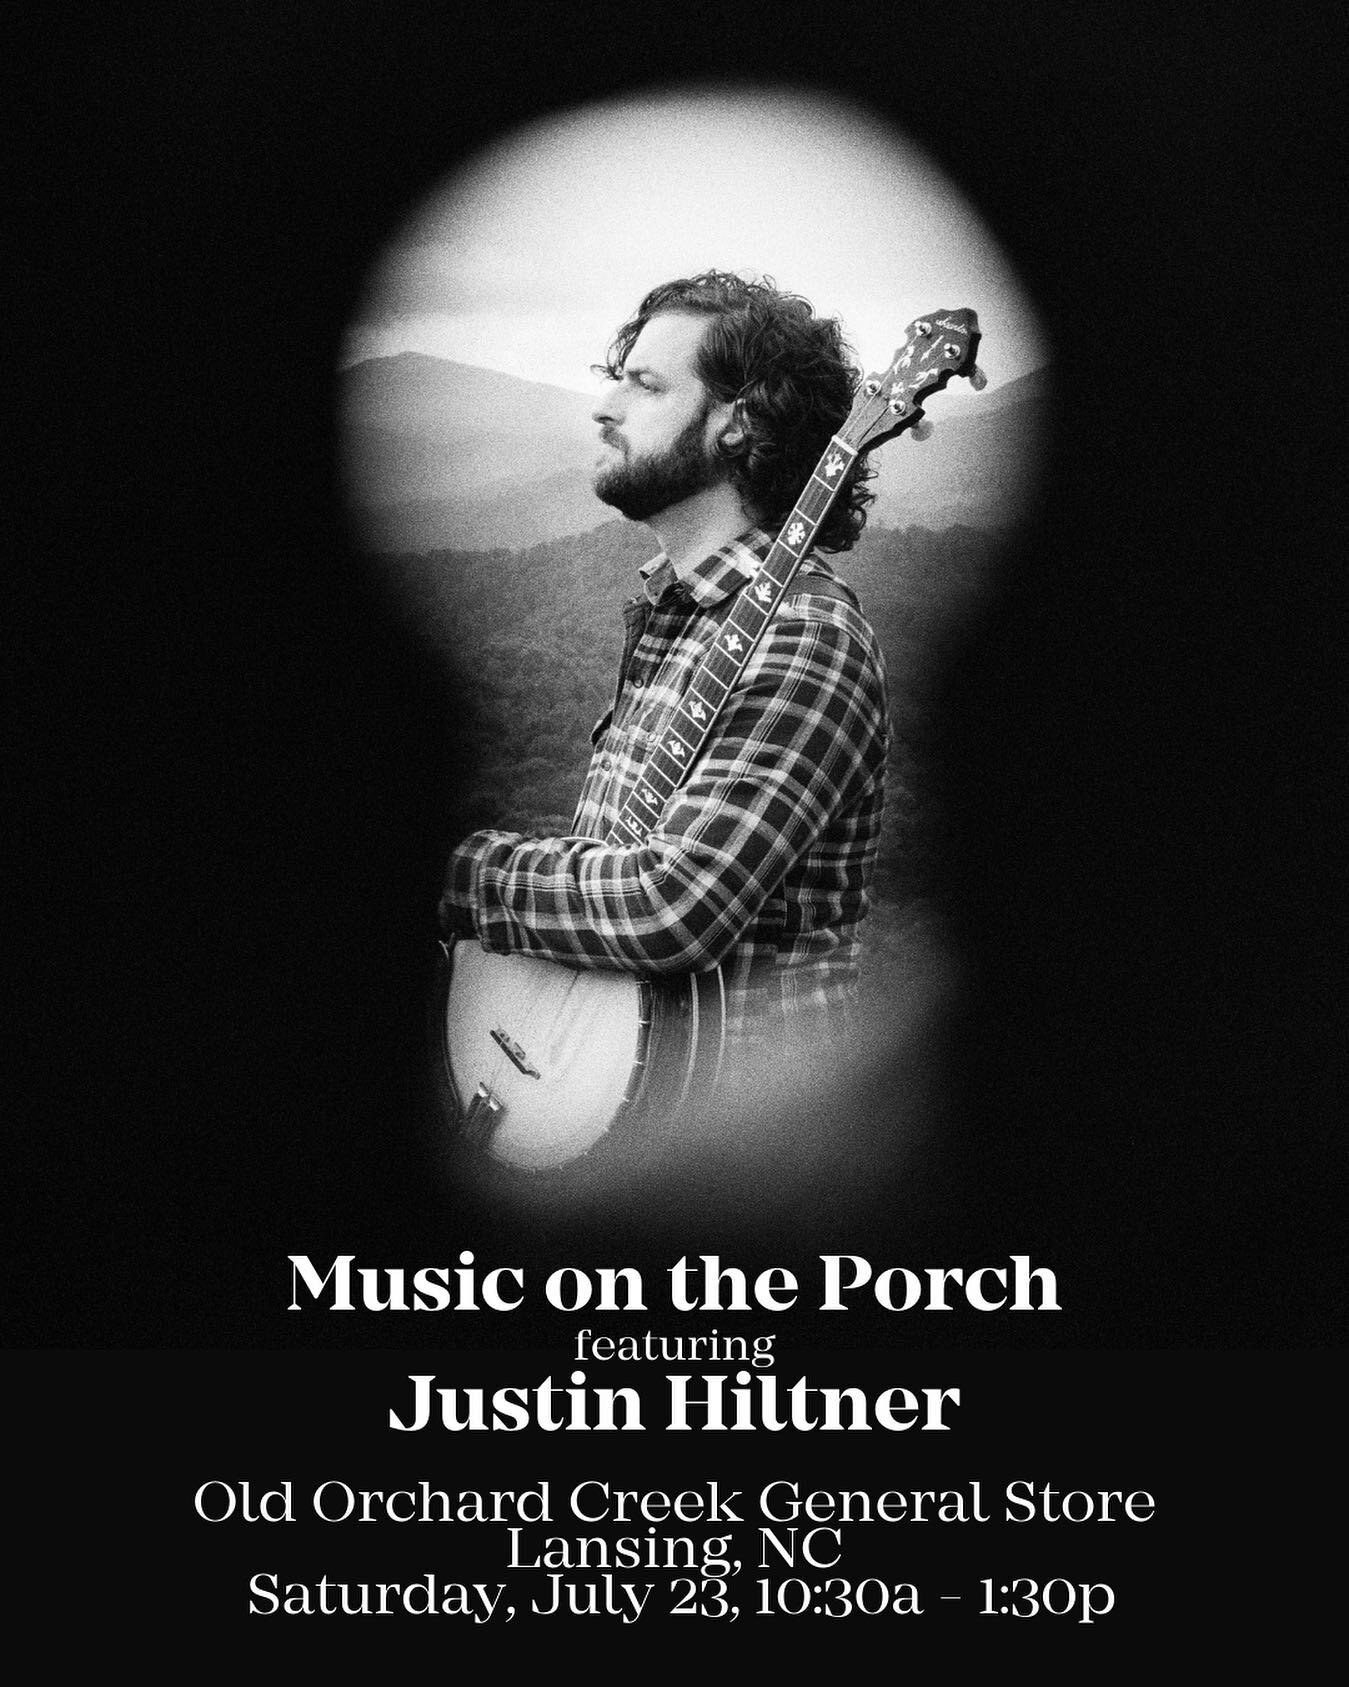 Very excited to be playing music at one of my favorite places, @oldorchardcreekgeneralstore, this Saturday!! 🫐☕️🍷🪕

If you're in east Tennessee, southwest Virginia, or western North Carolina in gorgeous Ashe County come out Saturday morning, enjoy